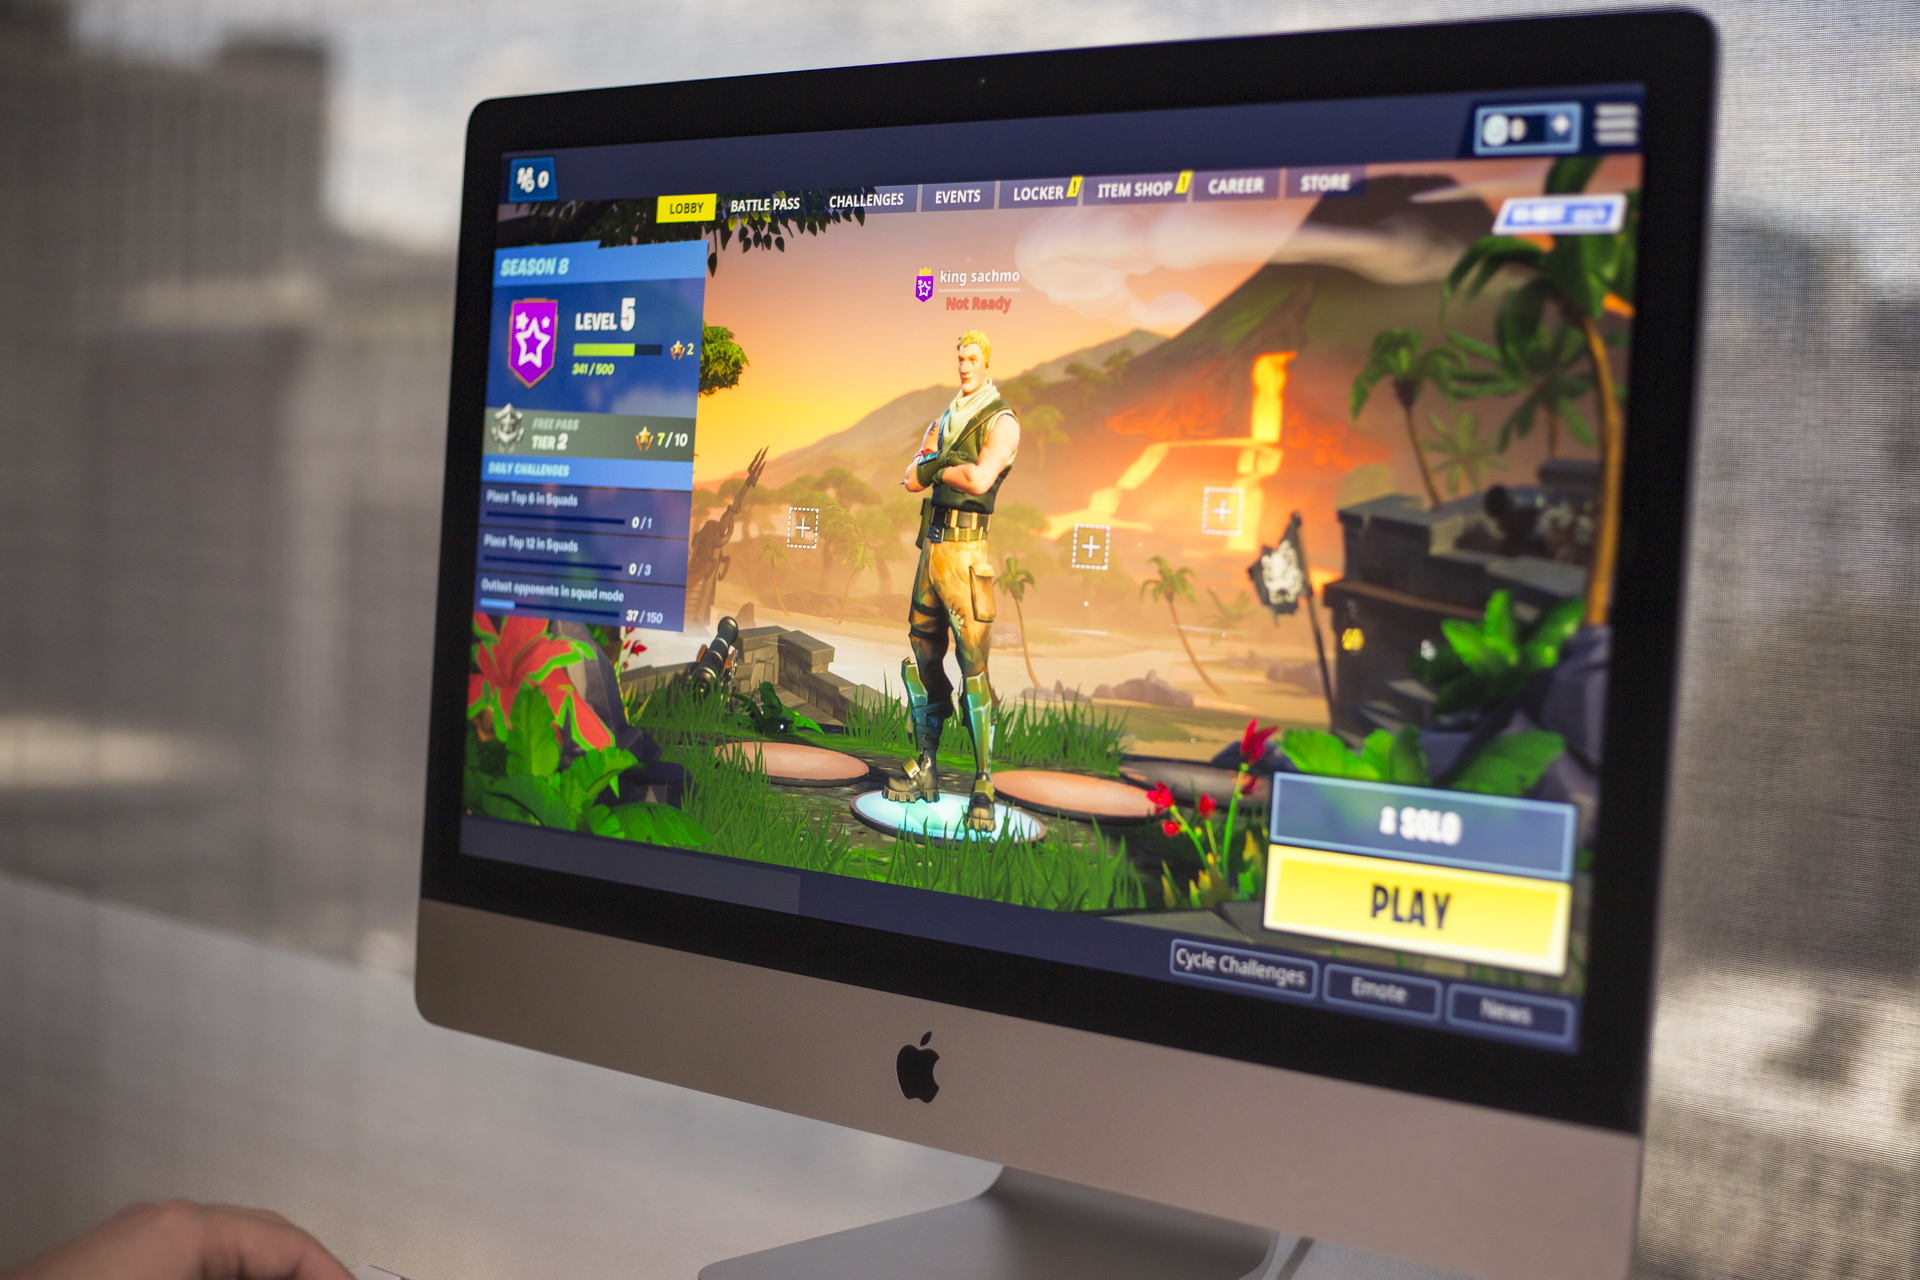 Play PC games on Mac, iPhone, or iPad with GeForce Now - 9to5Mac